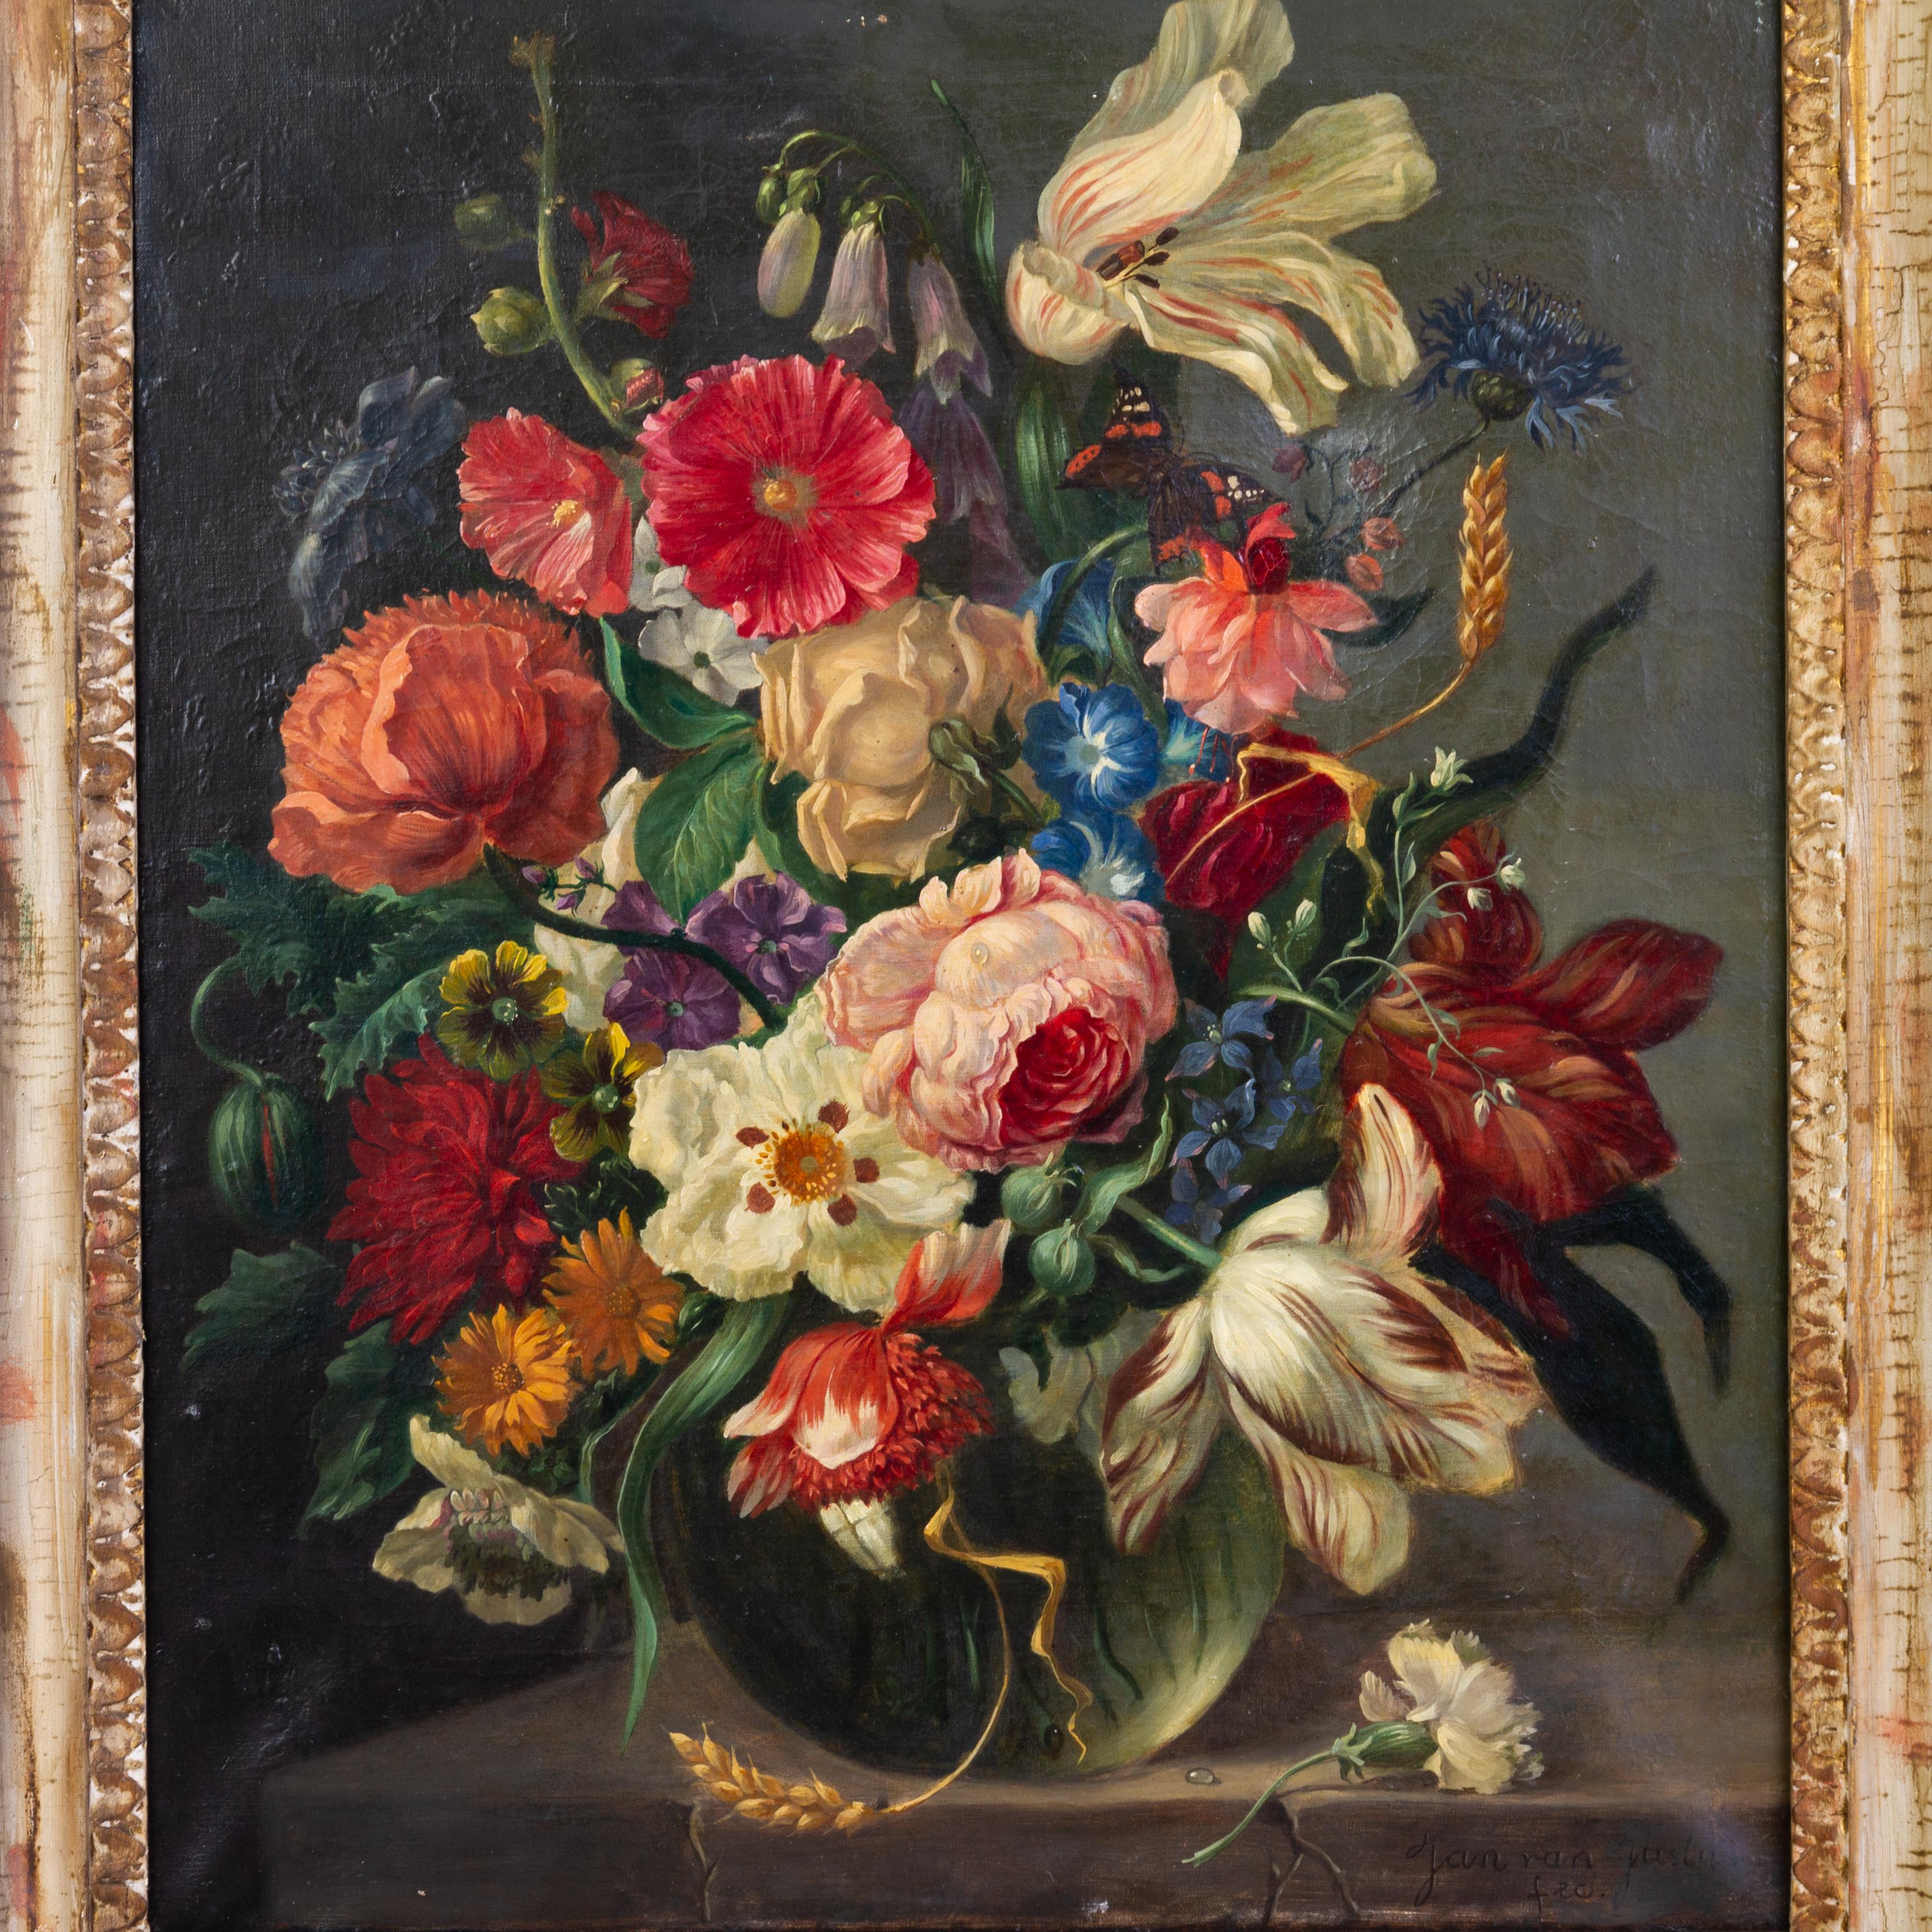 Justus van Huysum is known to have studied with Nicolaes Berchem and painted an eclectic array of subjects, including portraits, marine scenes, landscapes, history and battle paintings, but was best known for his flower pieces.

Measuring (framed)